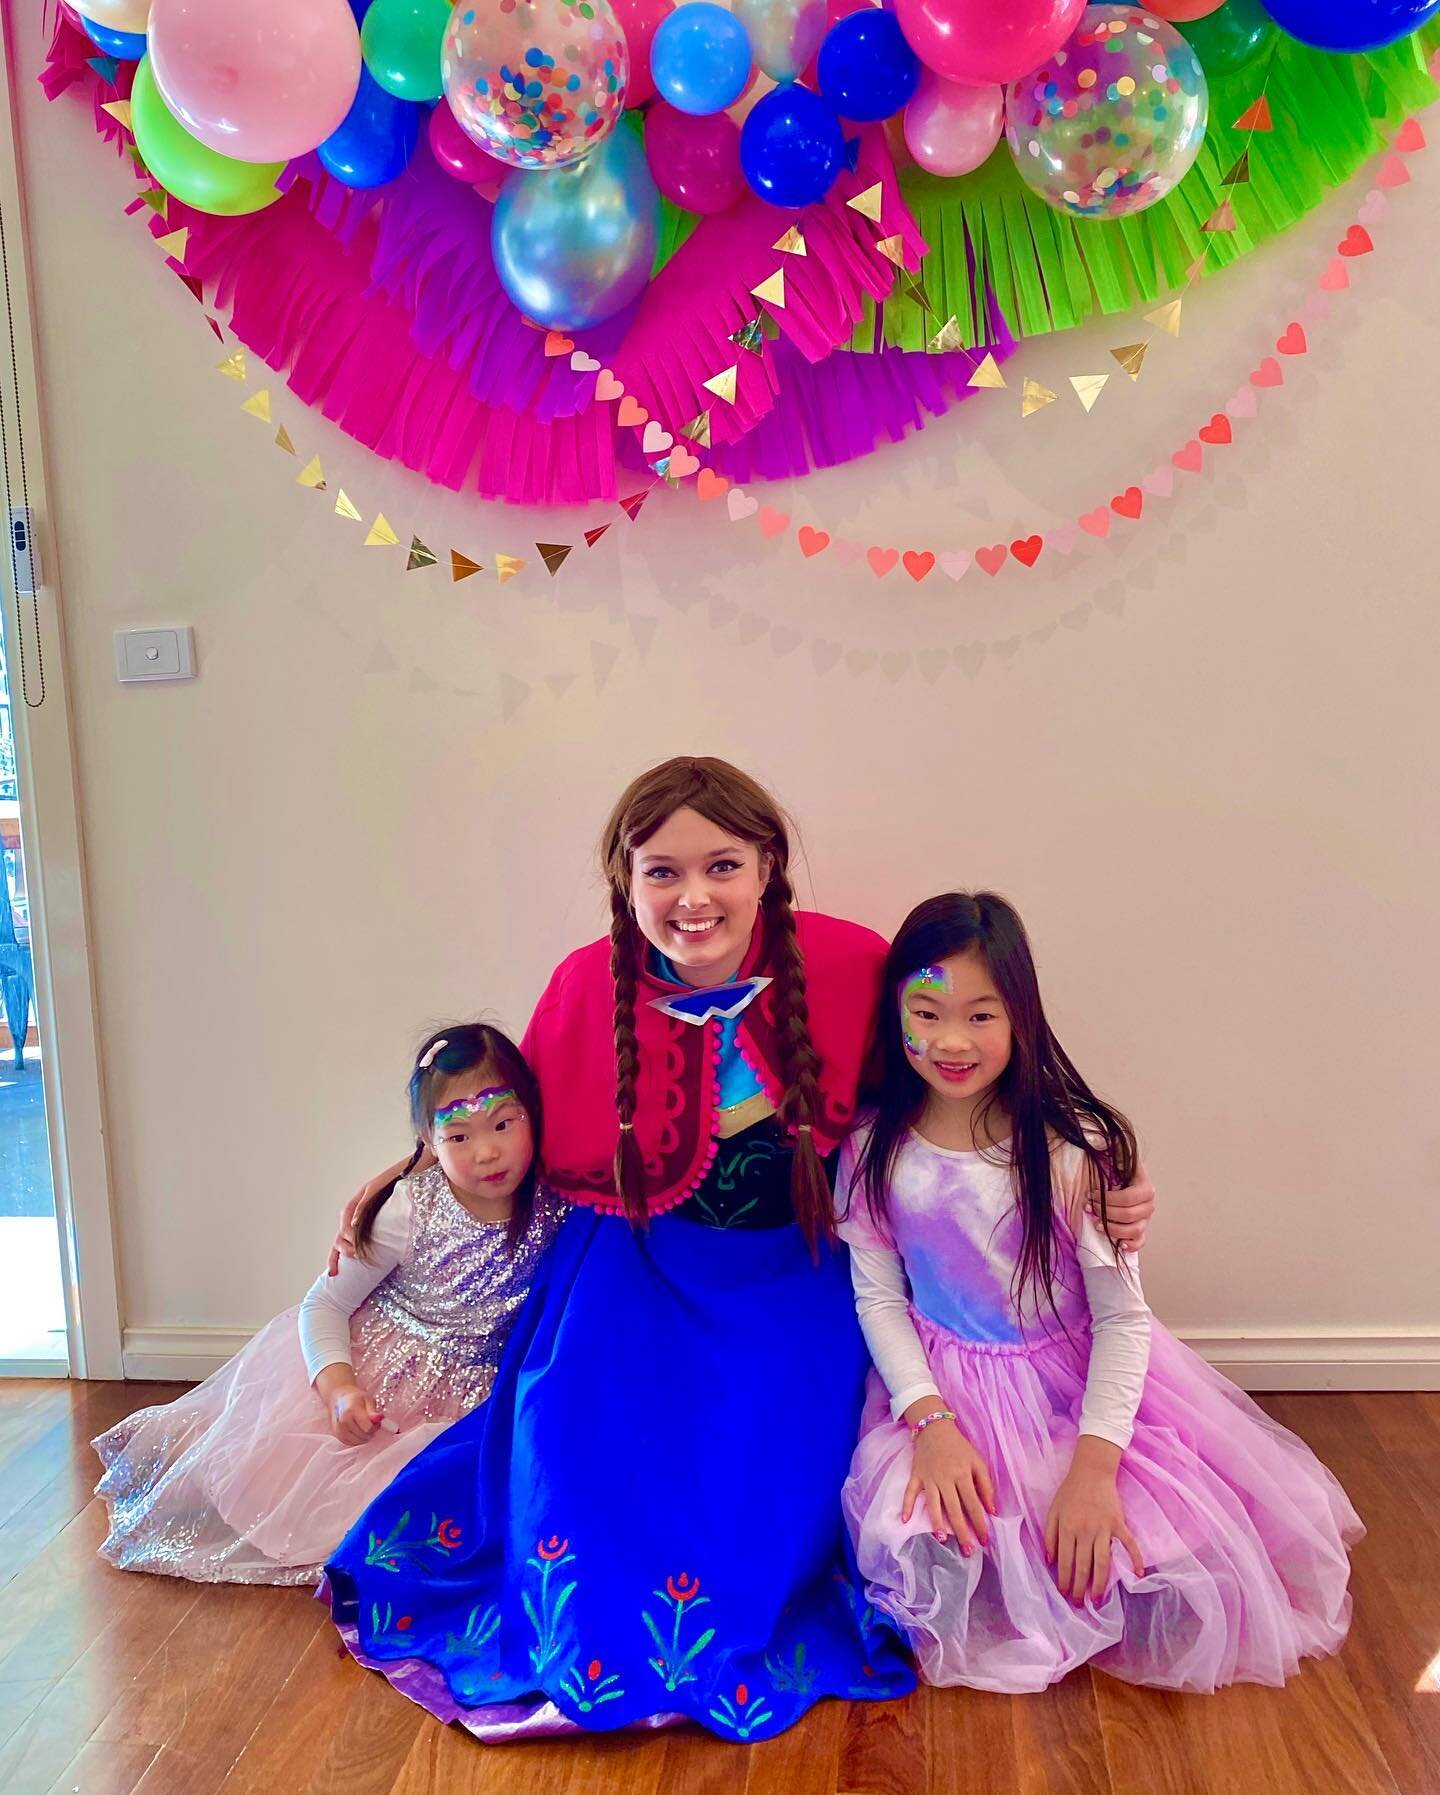 &ldquo;Anna was absolutely amazing. The mums present were so impressed with her facepainting skills, and she was so professional. The girls were enthralled with her. 😍 It was a dream having Princess Parties help us celebrate again. We&rsquo;re alway